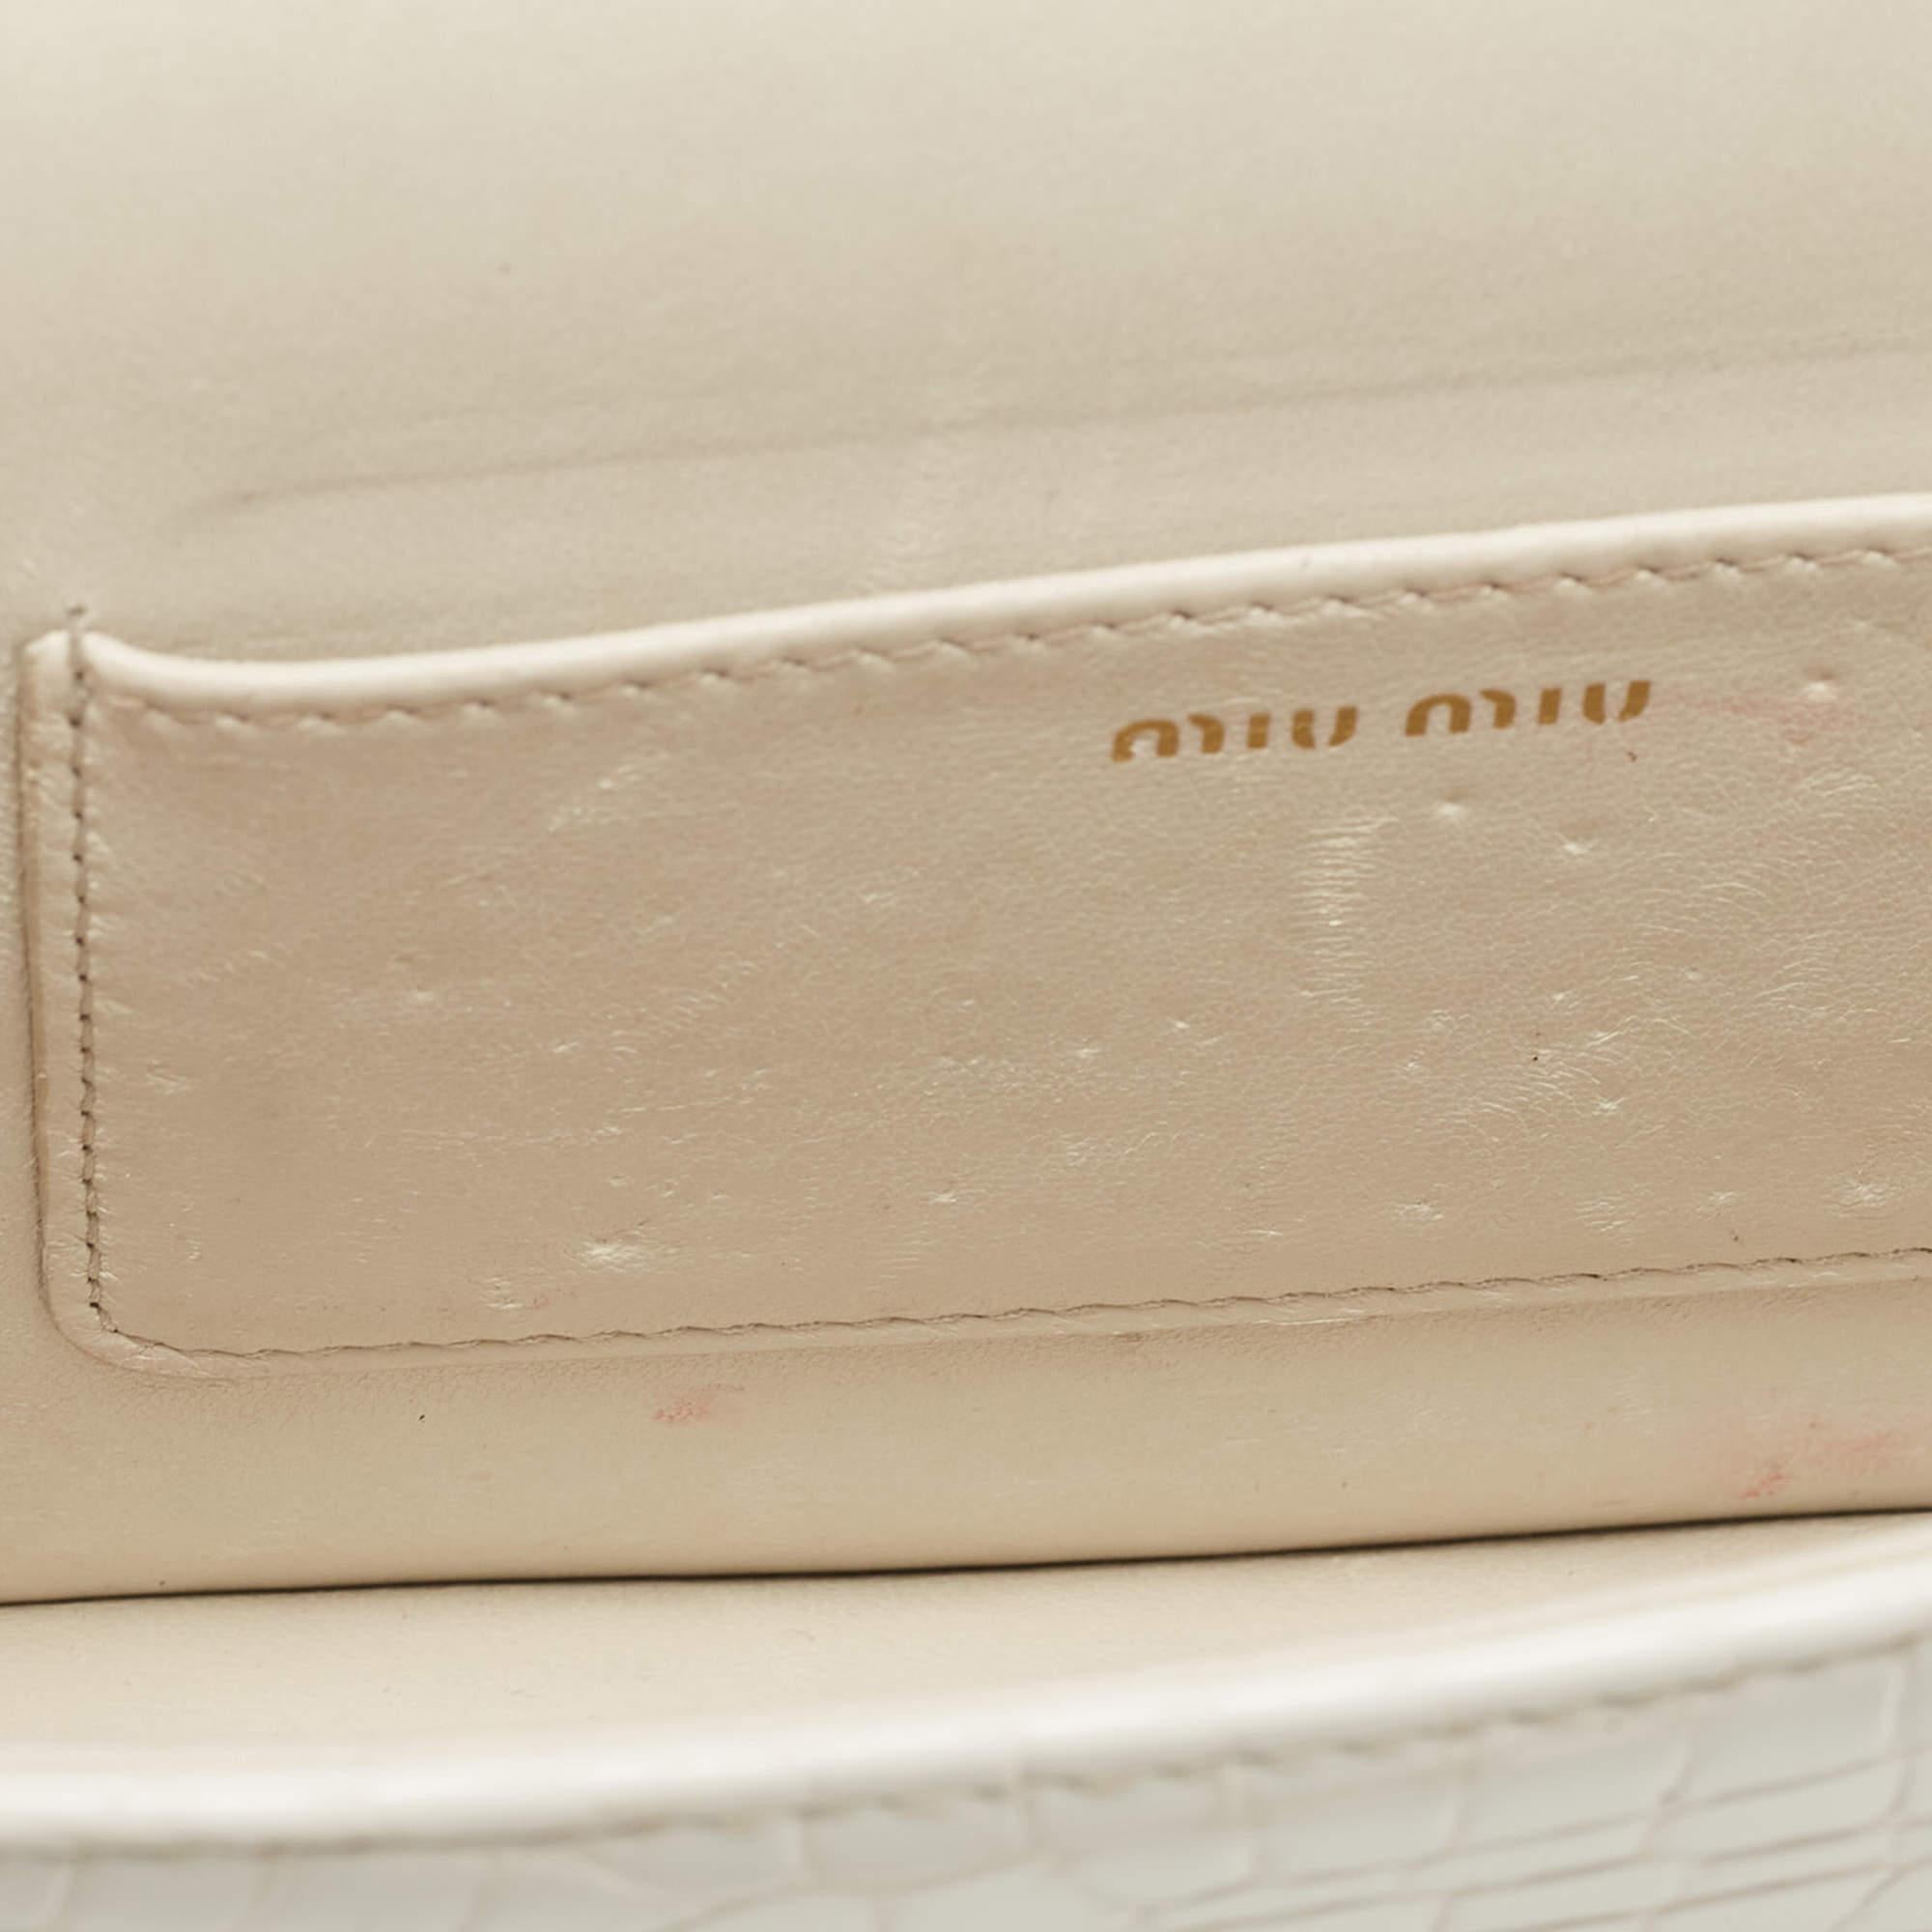 Miu Miu Off White Croc Embossed Leather Crystal Embellished Chain Clutch In Good Condition For Sale In Dubai, Al Qouz 2